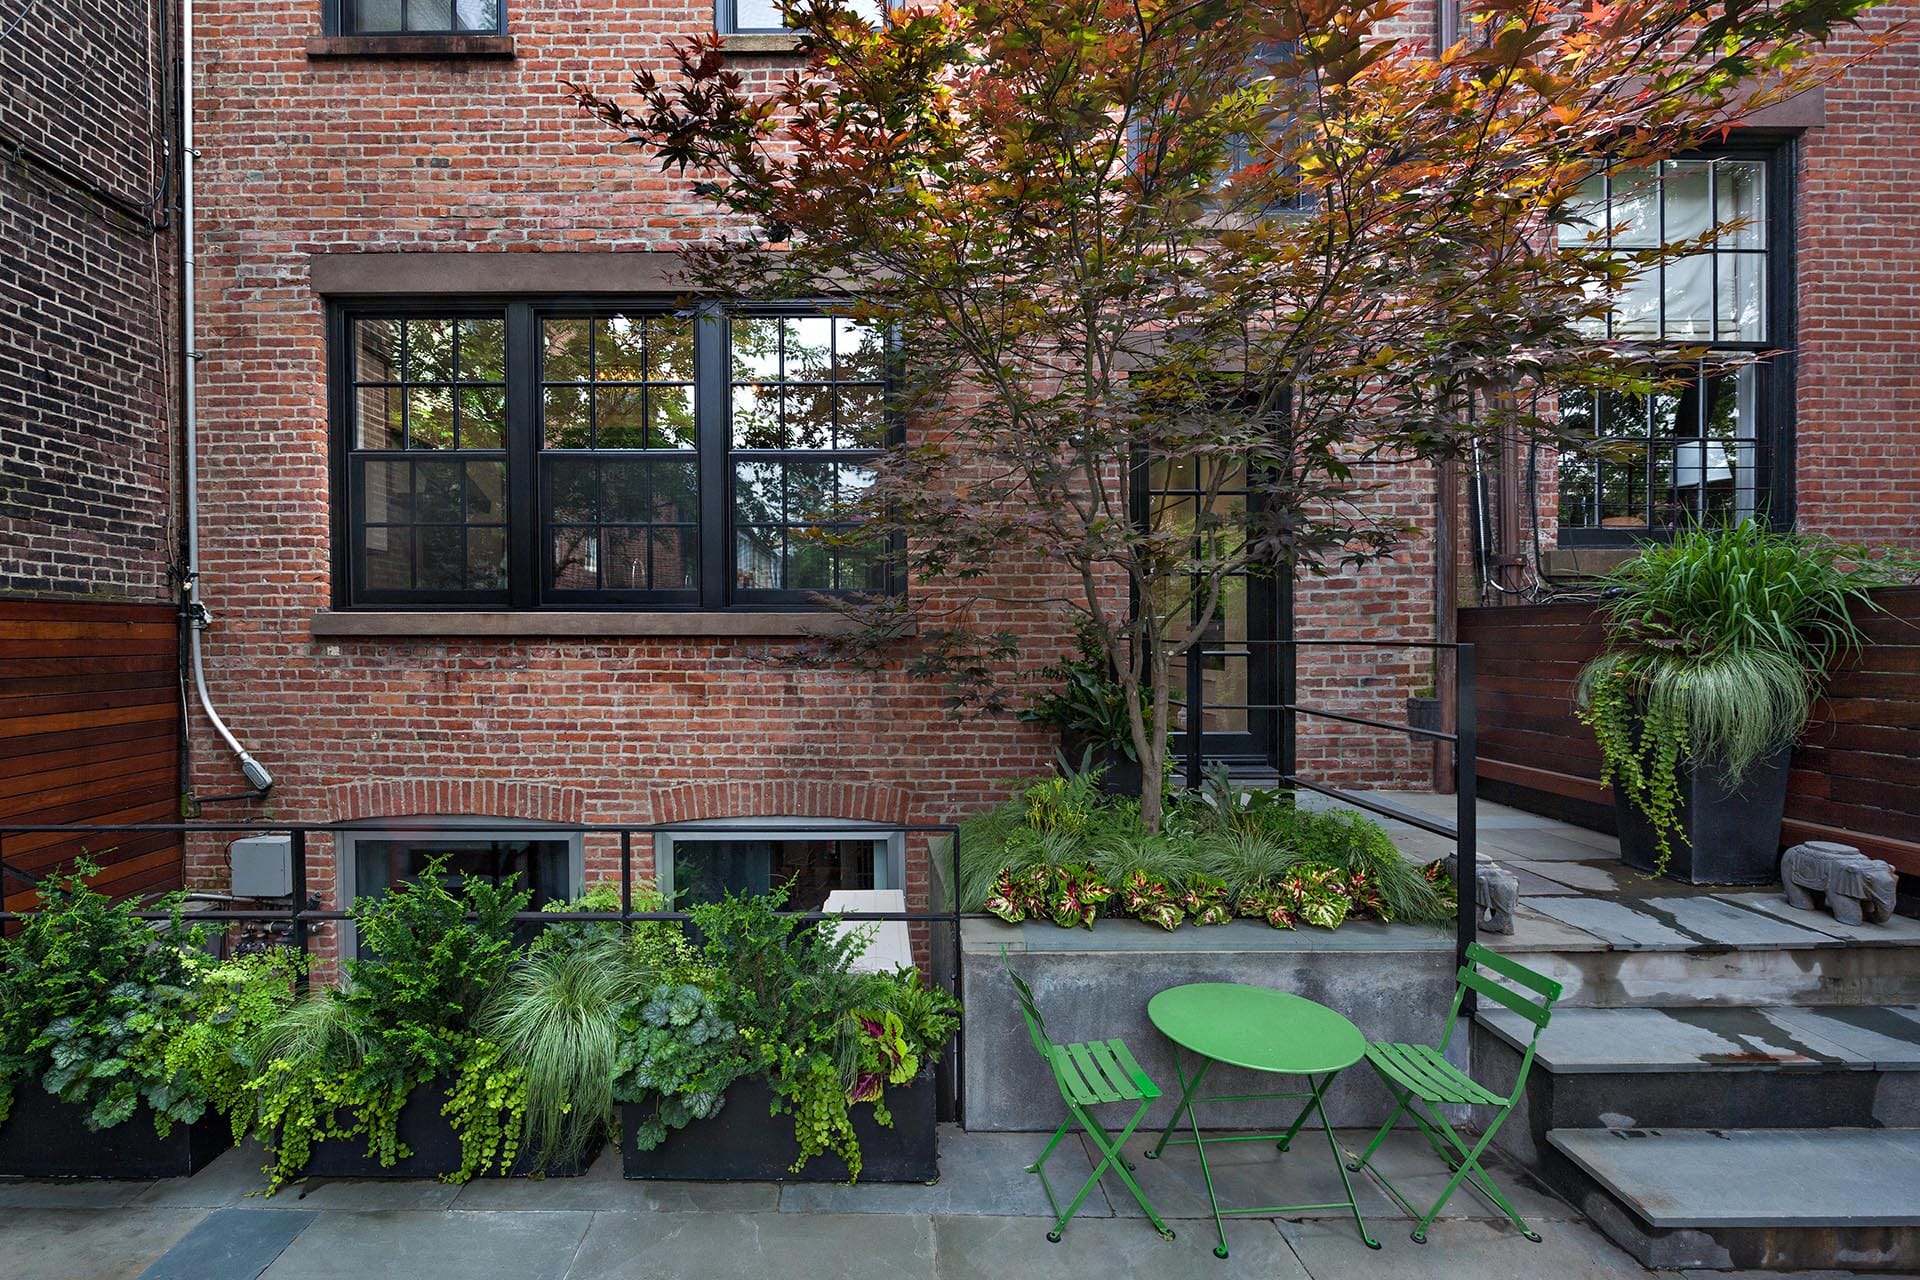 Rear façade of a brick house with a red tree, bluestone pavers, and green table and chairs